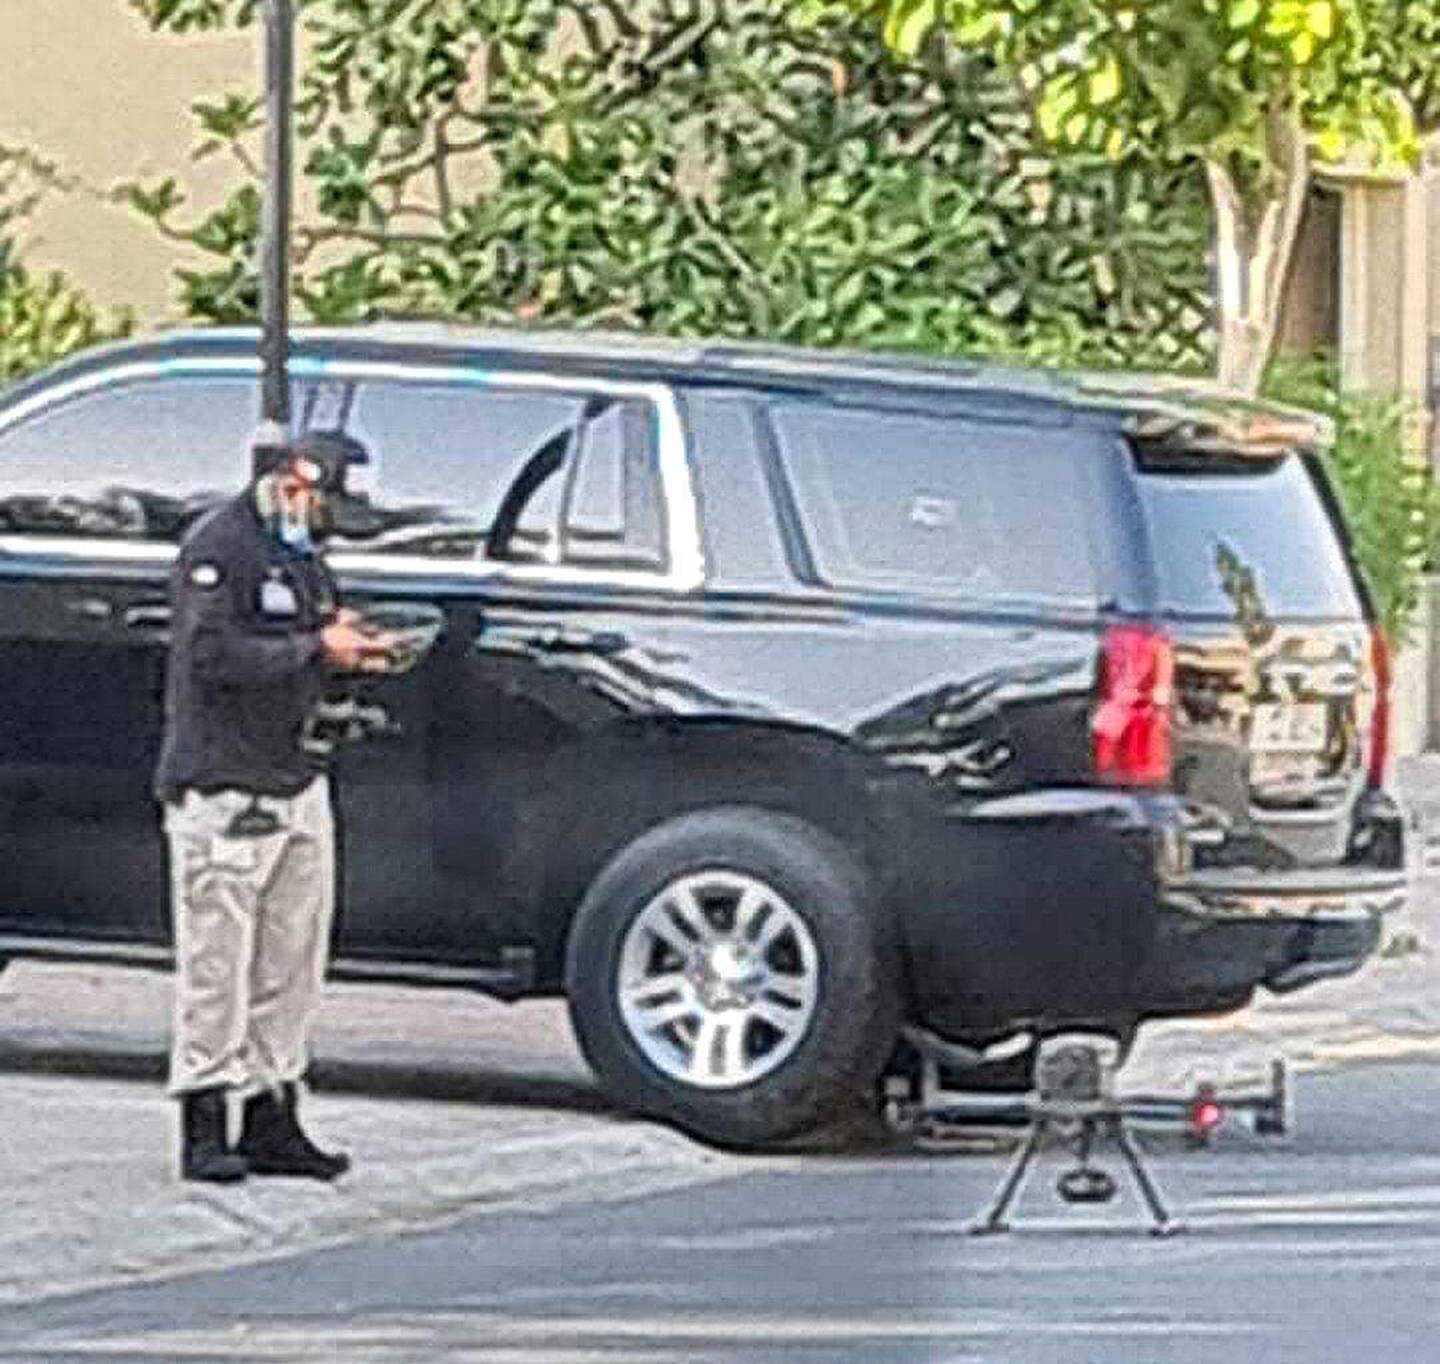 A police official prepares to launch an aerial drone to scan the Springs district, south of Dubai Marina, following reports of a big cat on the loose. Authorities urged the public to call 999 if they spot a creature that resembles a large black cat. The National